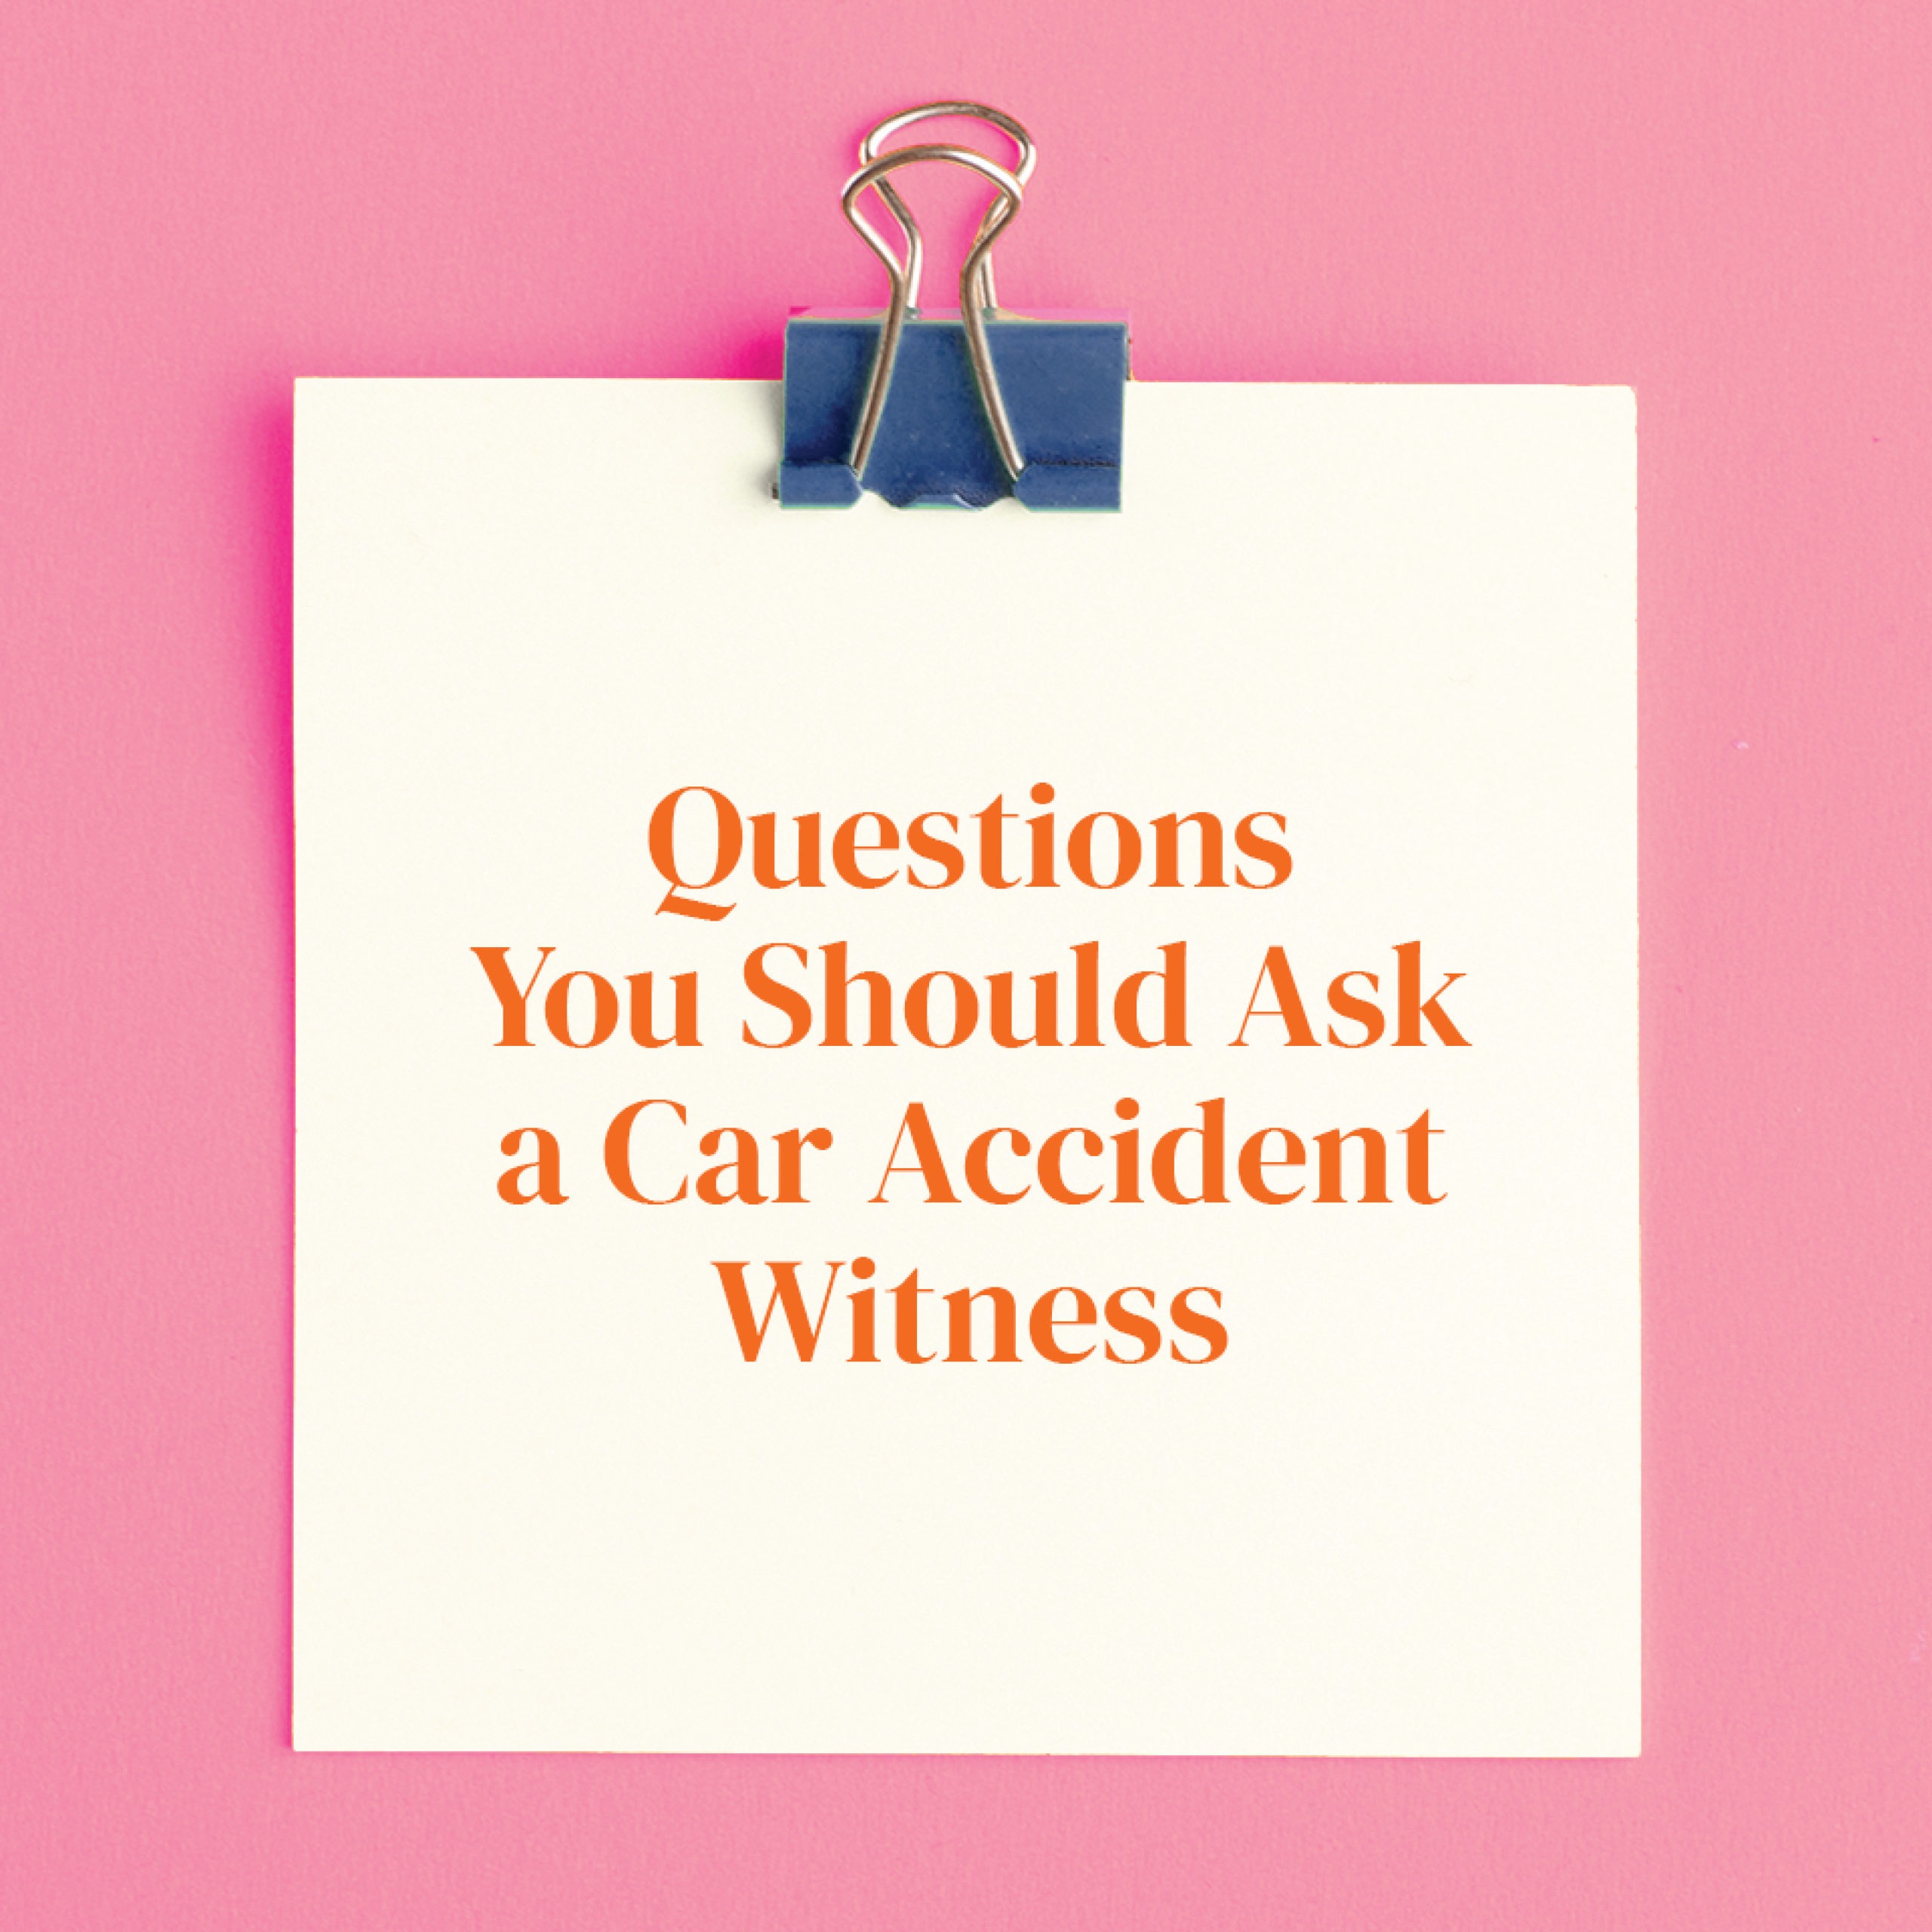 Questions to Ask a Car Accident Witness?